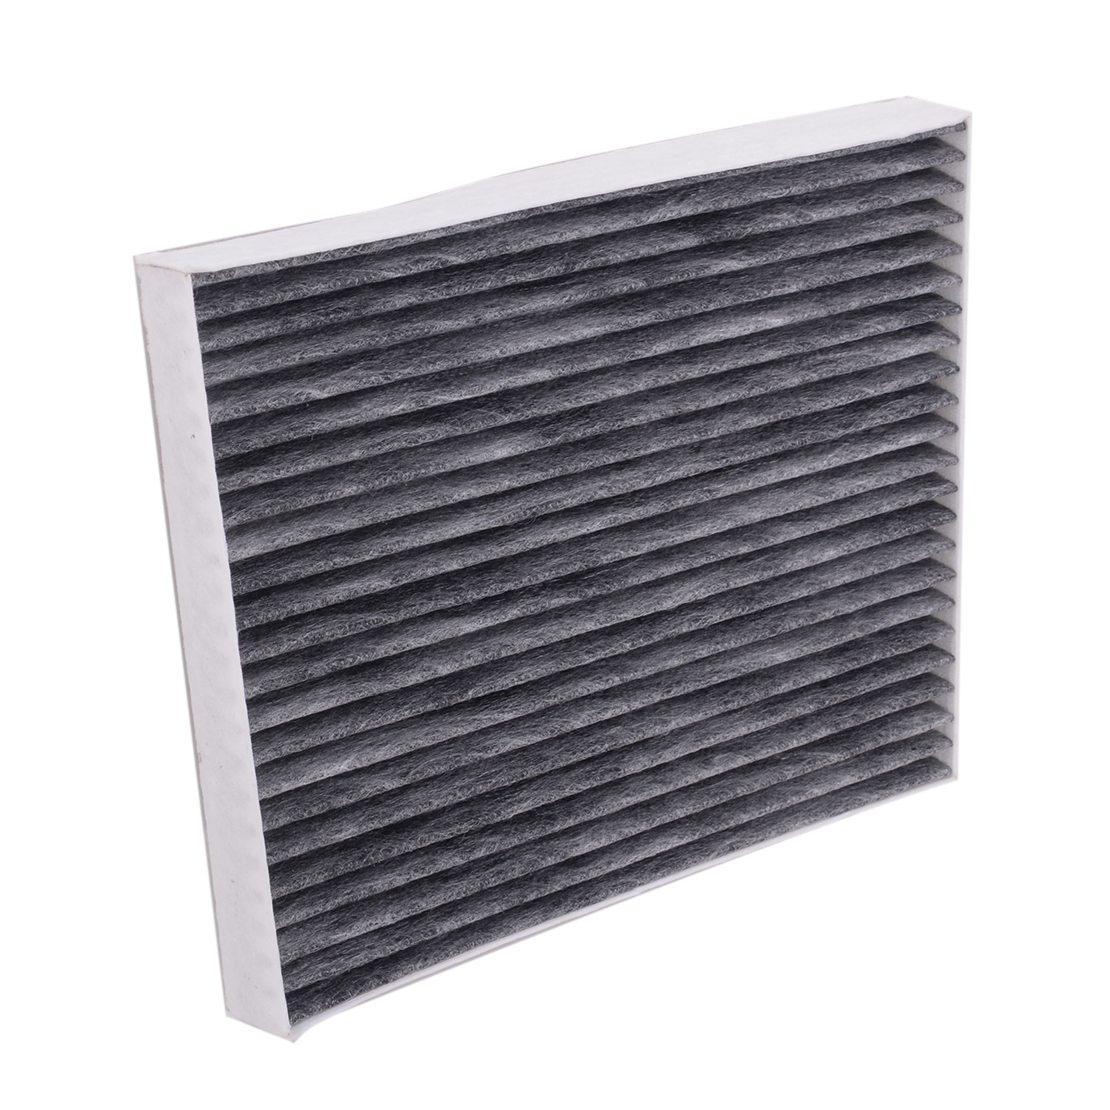 Cabin Air Filter fit for Hyundai Accent Elantra Kia Forte Rio 2018 2019 2020 | eBay Cabin Air Filter For 2019 Kia Forte